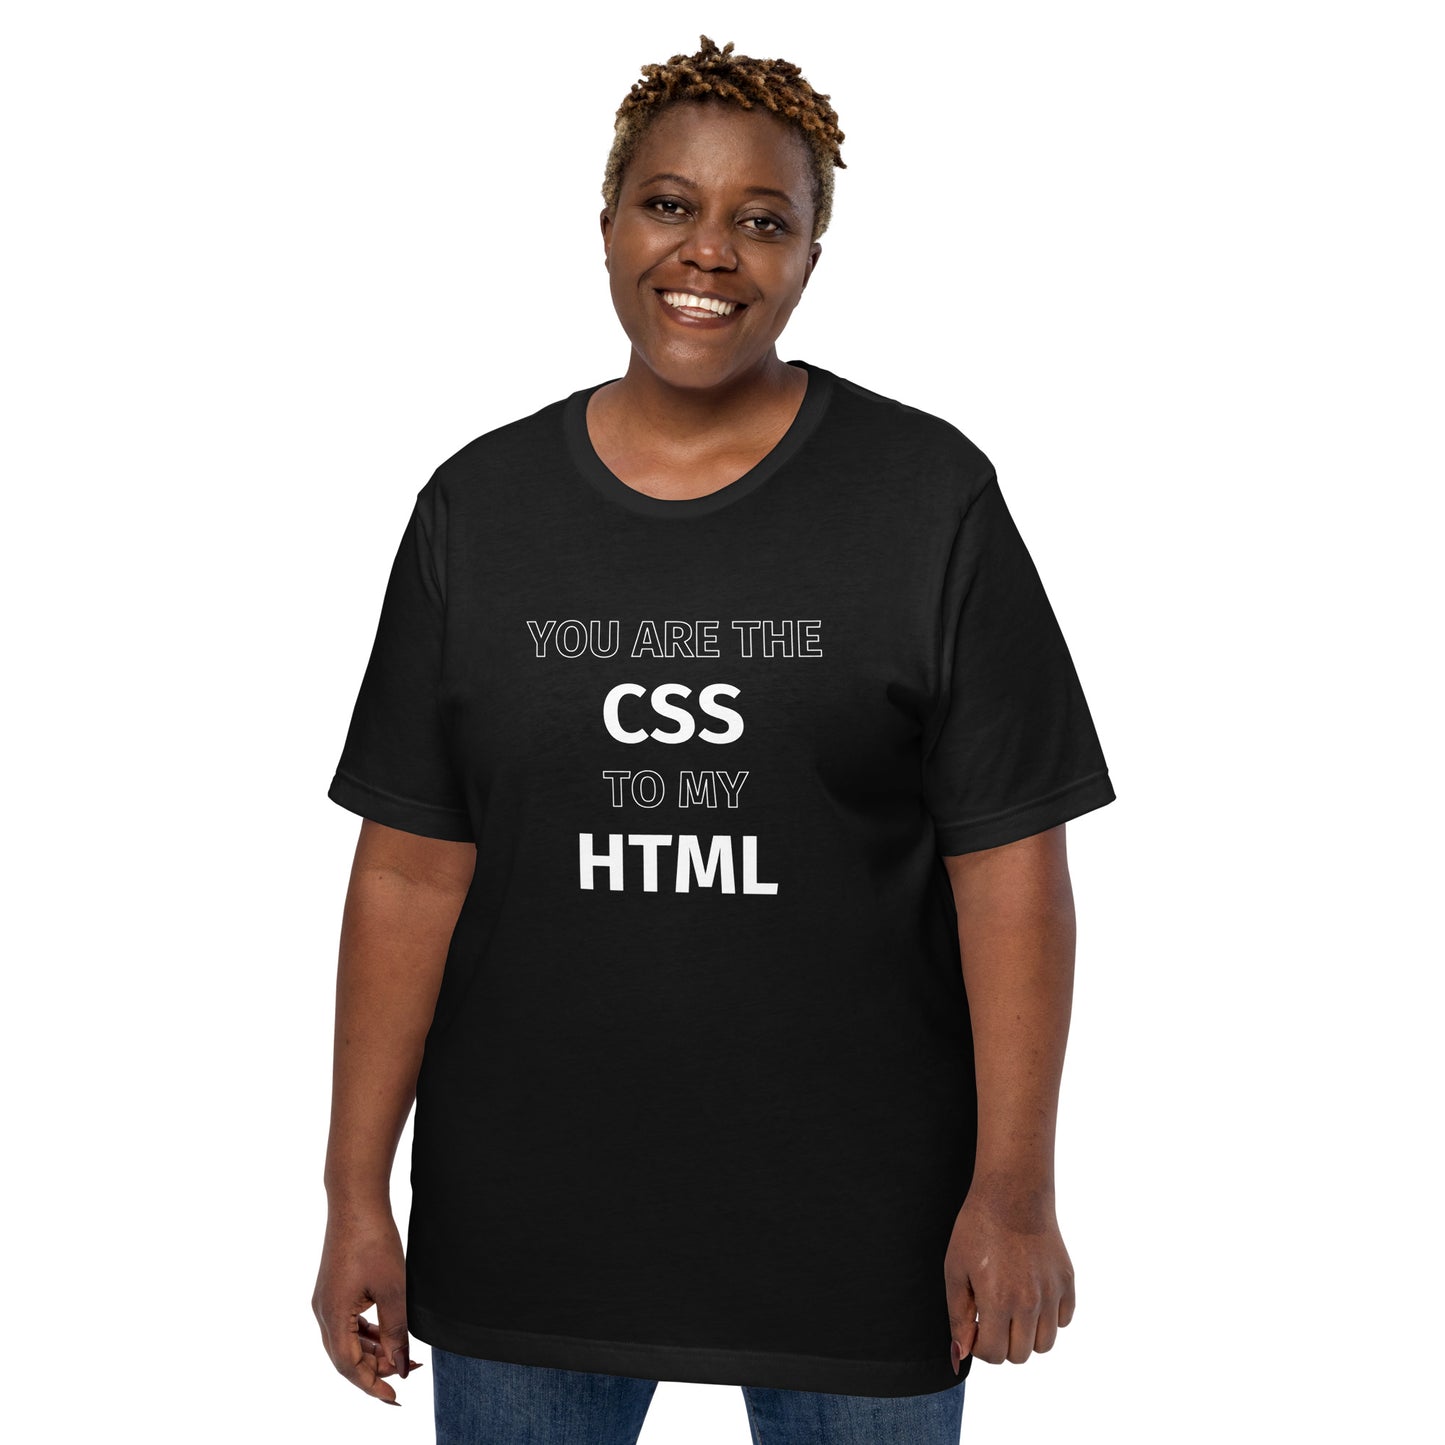 You are the CSS to my HTML Shirt